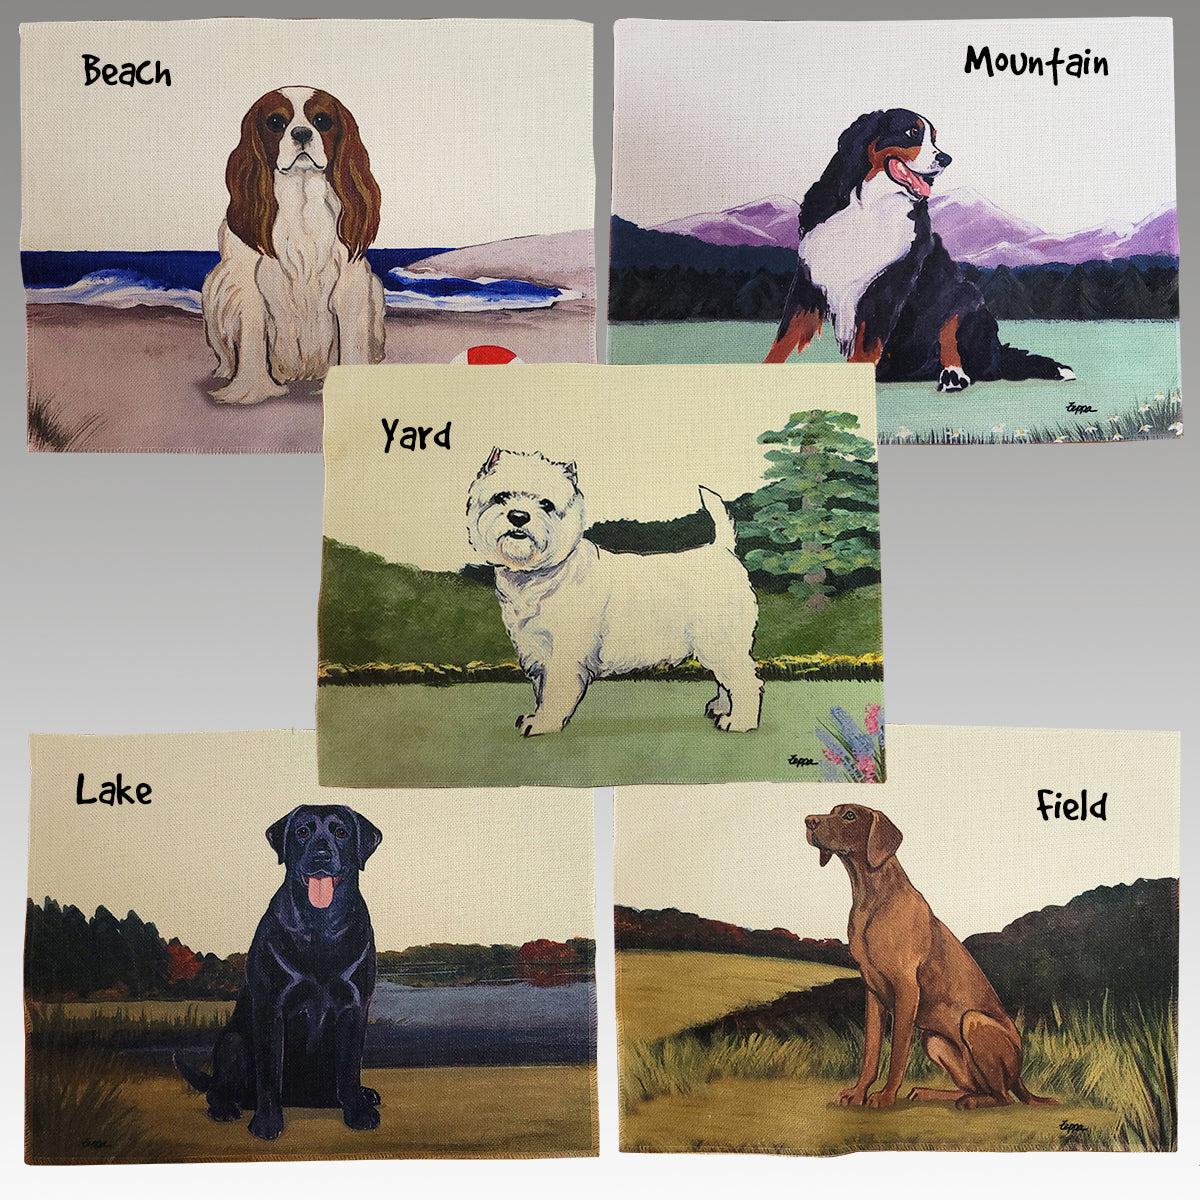 Kerry Blue Terrier Scenic Placemats